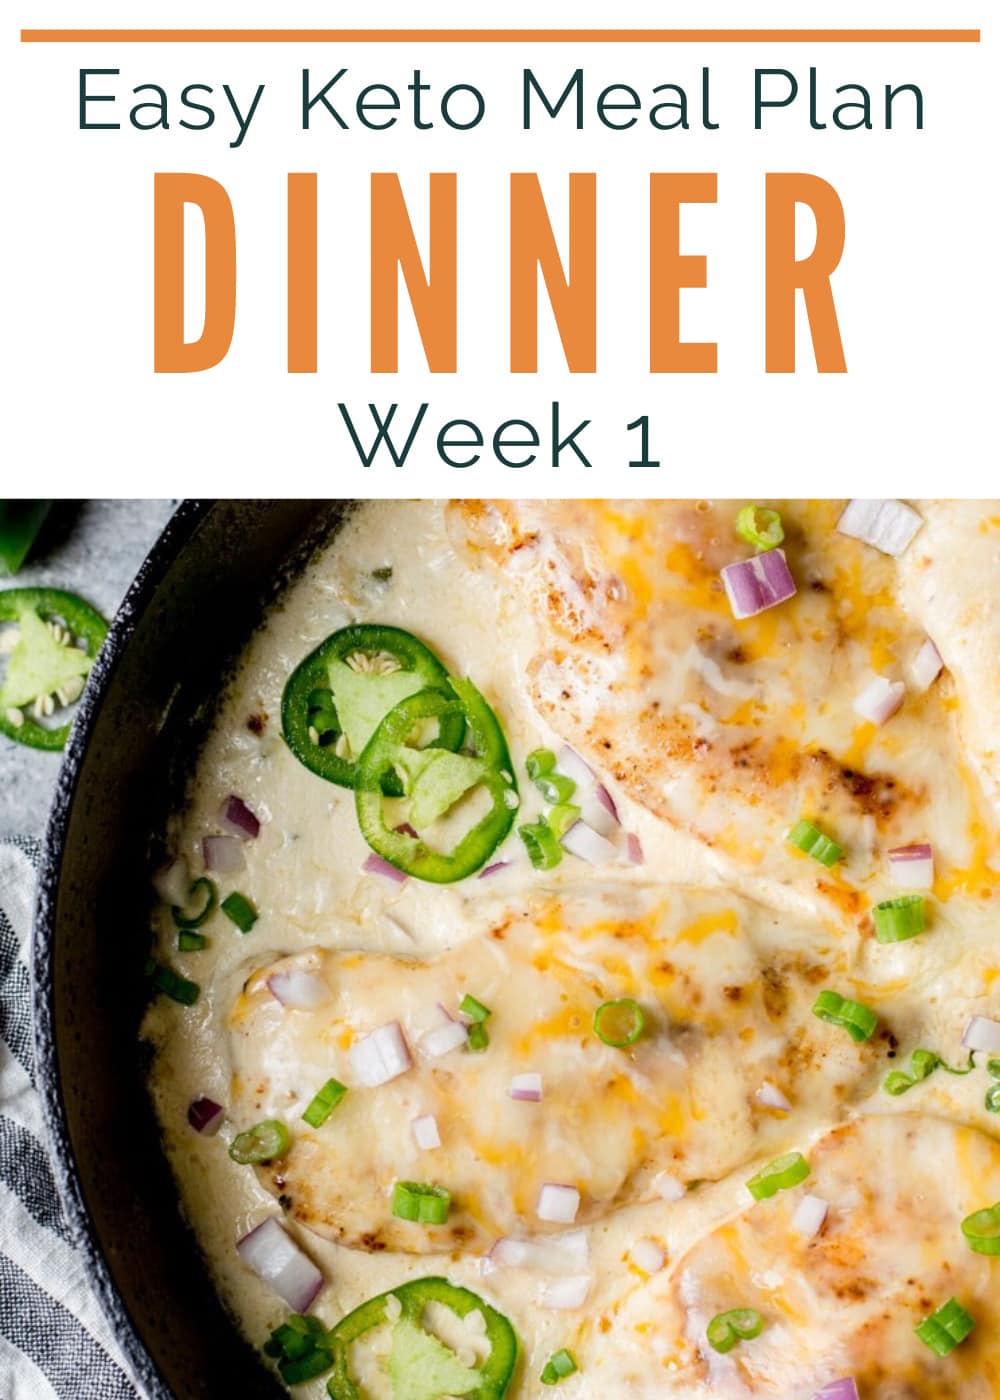 Simple Low Carb Meal Plan (Week 1) - easy recipes and planning tips!